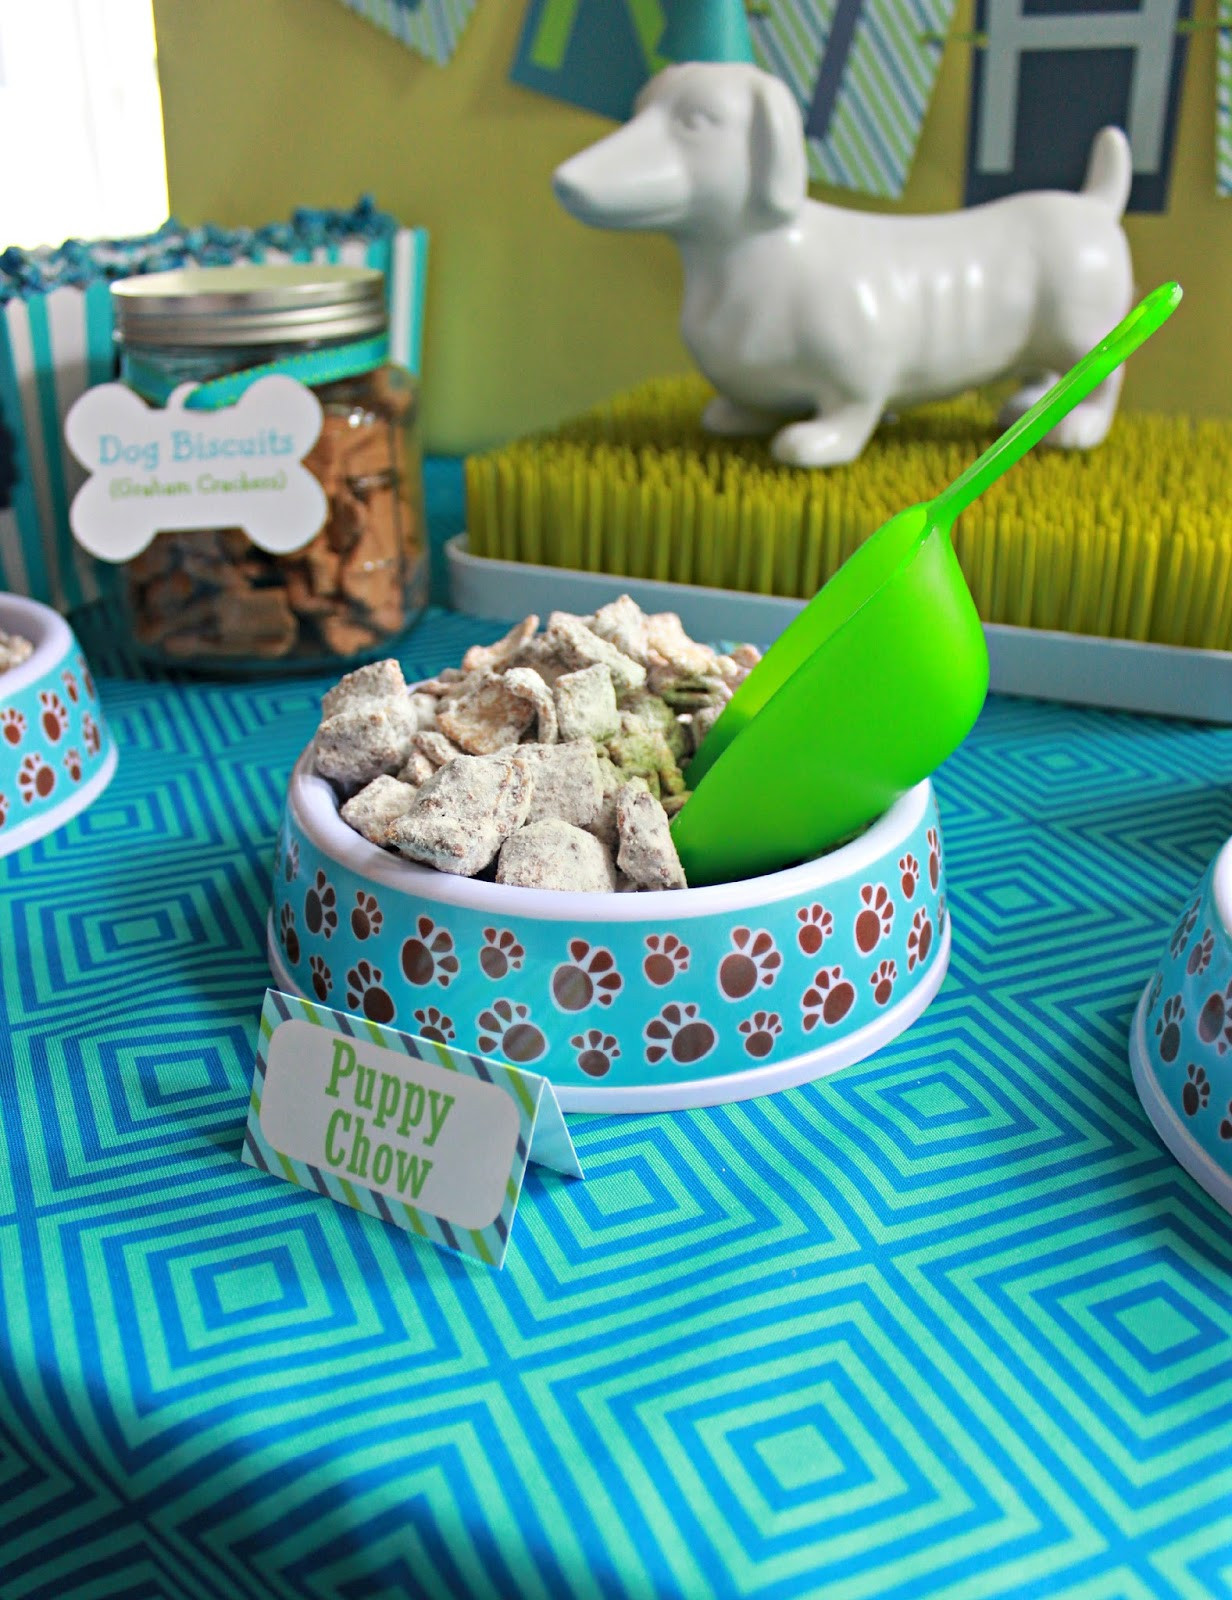 Dog Birthday Decorations
 It s a Pawty Puppy Party First Birthday Part 1